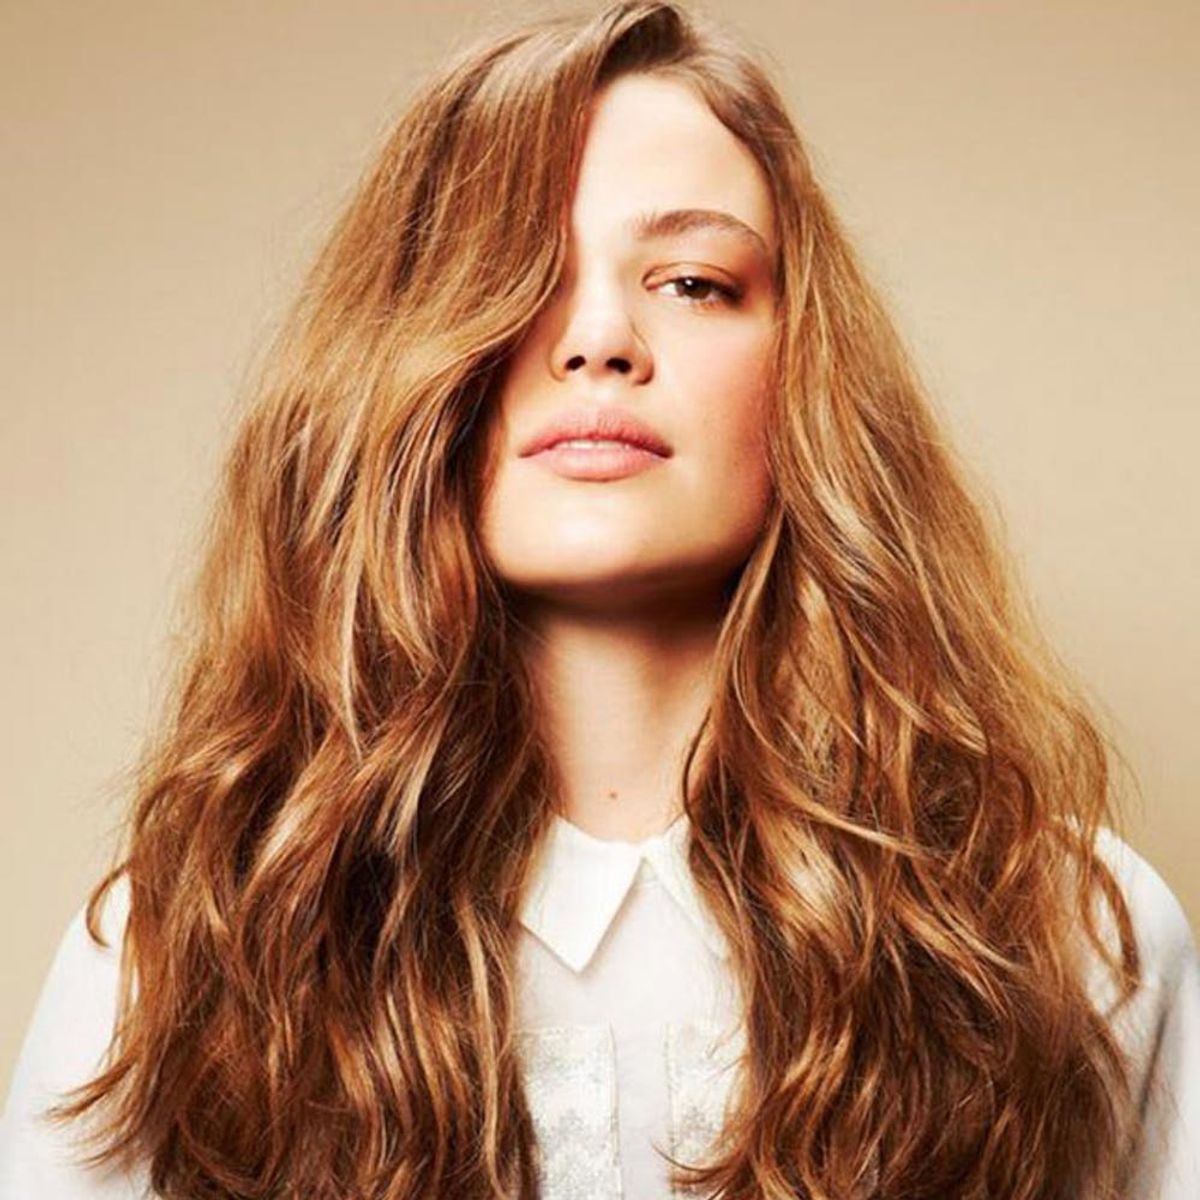 2014’s Top Hair Color Trends + What’s Going to be HUGE in 2015